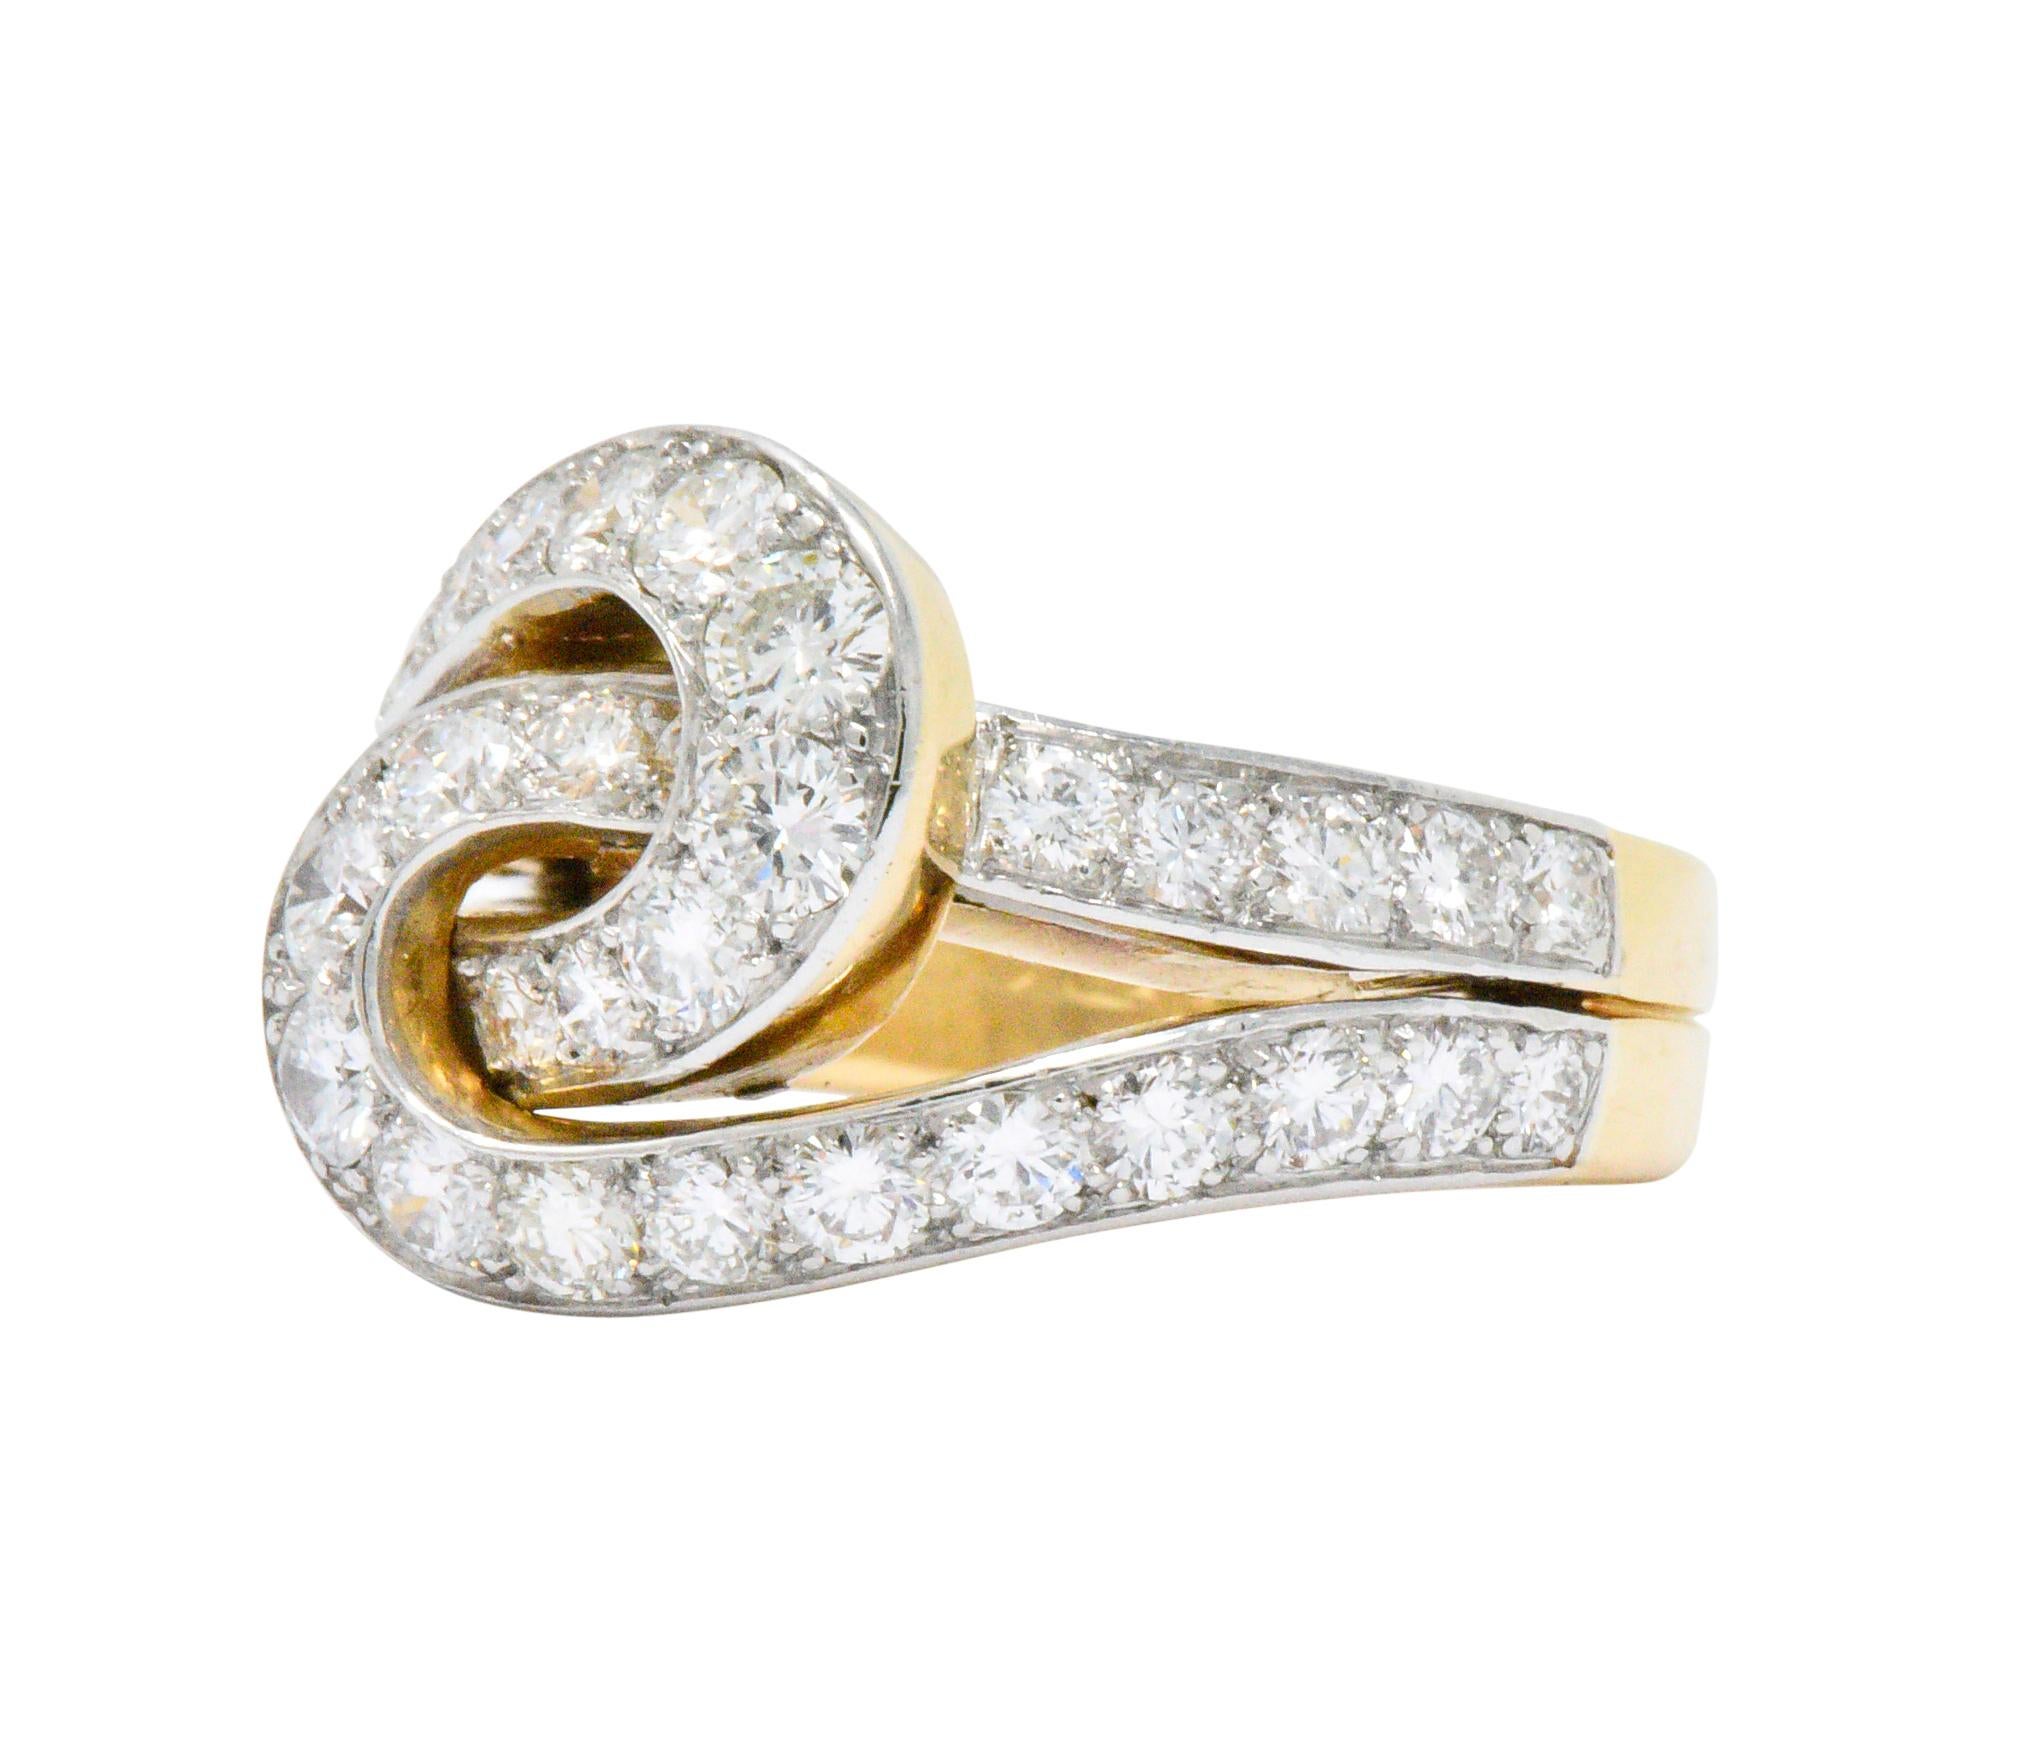 Featuring interlocking loops, set with round brilliant cut diamonds, weighing approximately 3.00 carat total, G/H color and VS clarity

Fantastic cocktail ring with presence

Fully signed Cartier and numbered (worn)

Engraved 